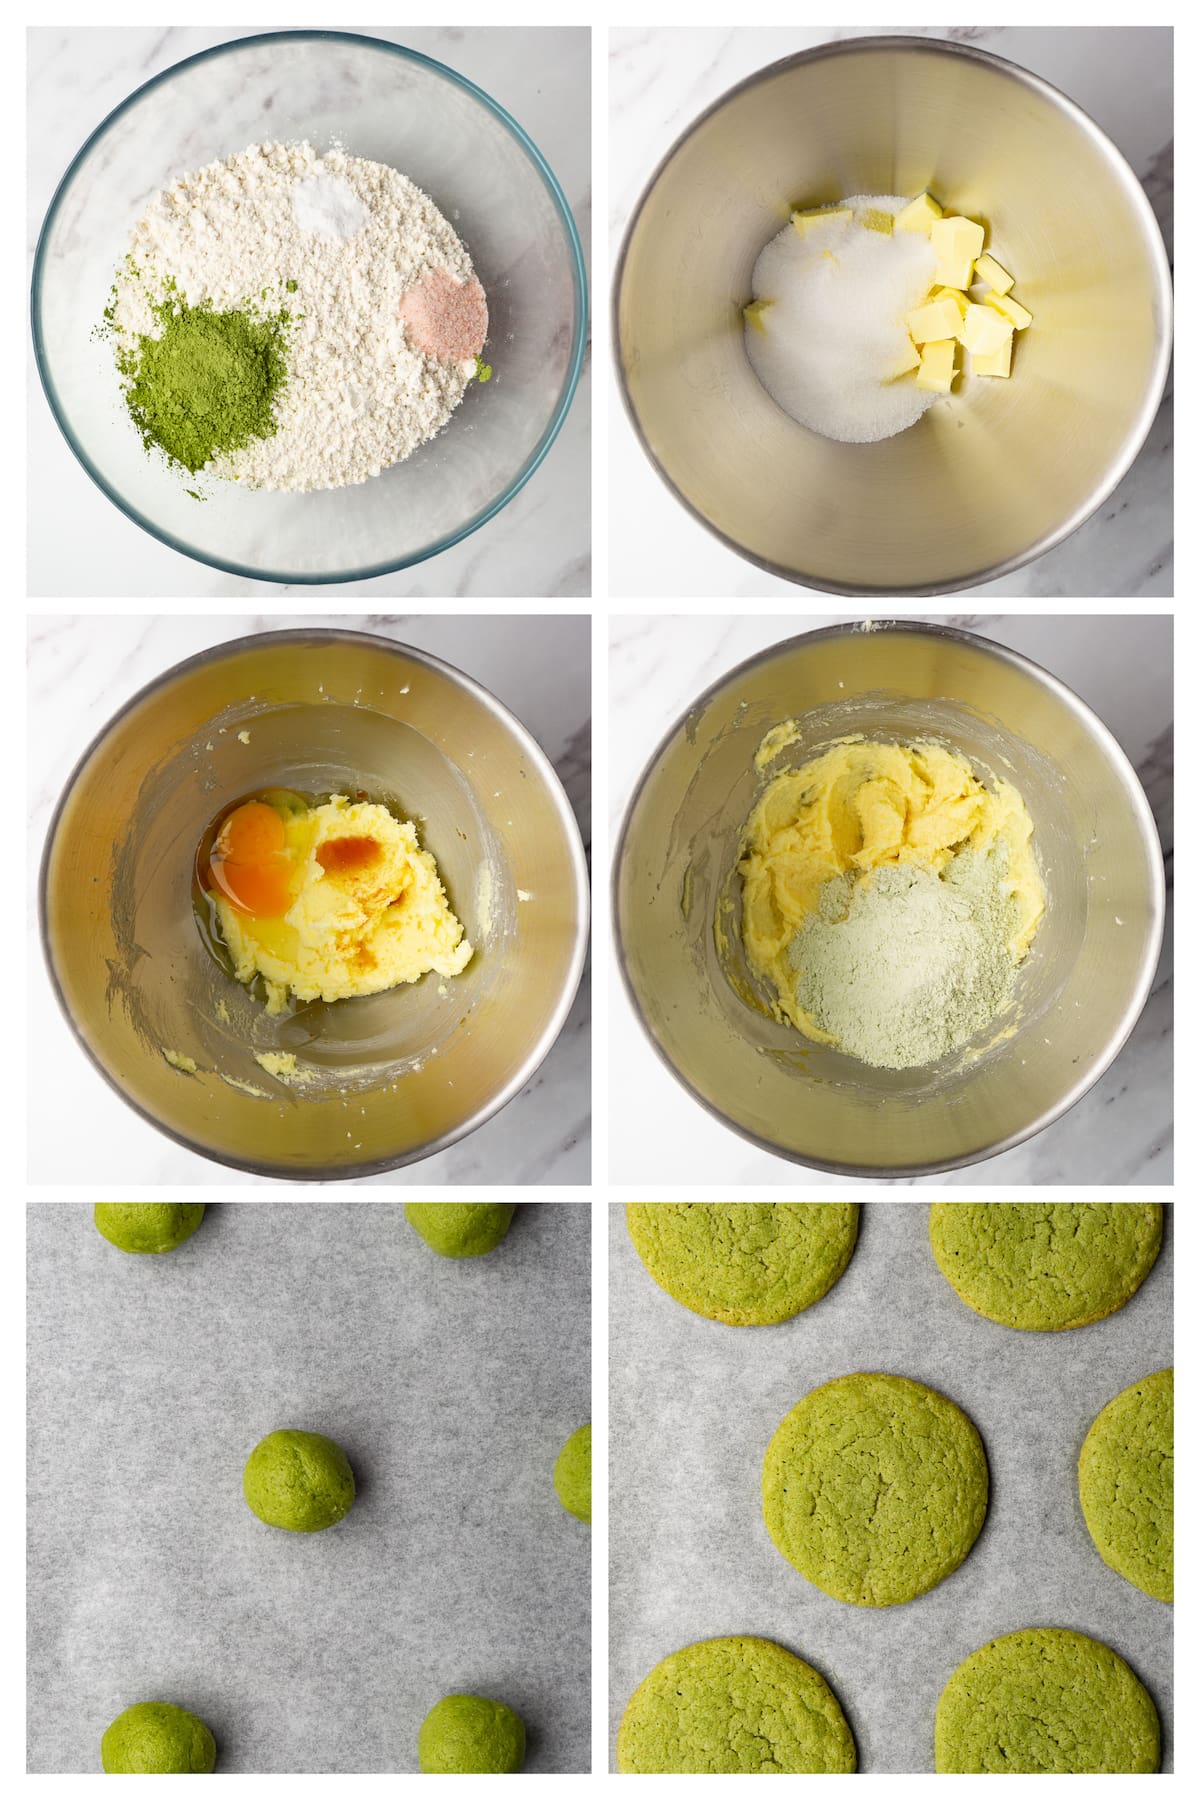 The collage image shows six steps to make green matcha cookies.